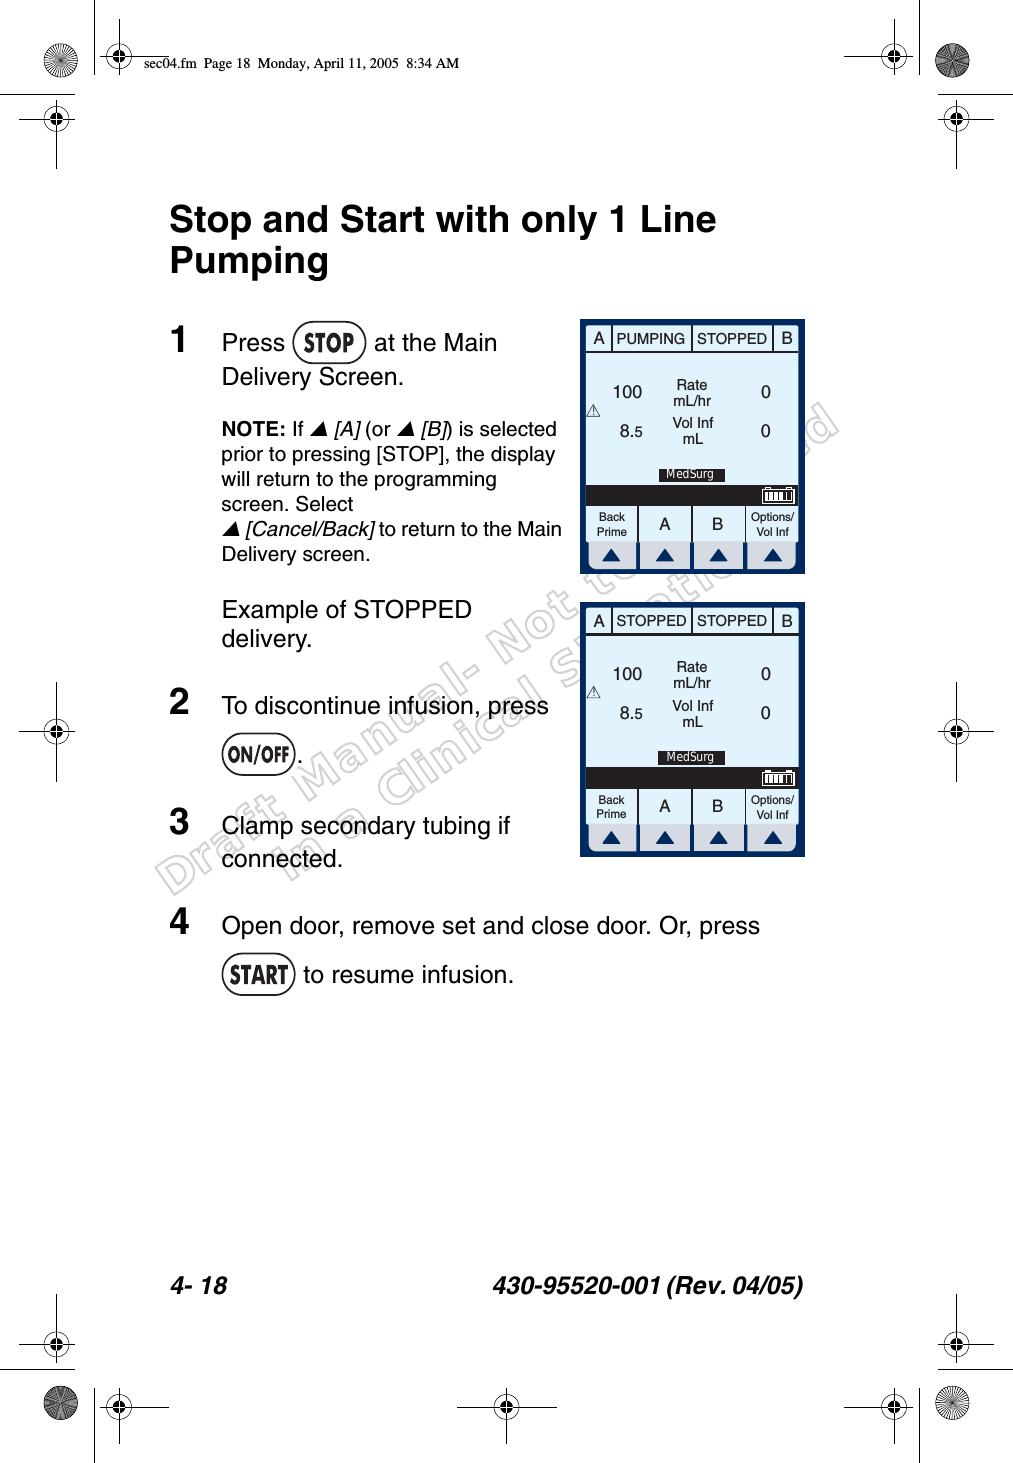 Draft Manual- Not to be usedin a Clinical Situation.4- 18 430-95520-001 (Rev. 04/05) Stop and Start with only 1 Line Pumping1Press   at the Main Delivery Screen.NOTE: If  [A] (or  [B]) is selected prior to pressing [STOP], the display will return to the programming screen. Select  [Cancel/Back] to return to the Main Delivery screen.Example of STOPPED delivery.2To discontinue infusion, press .3Clamp secondary tubing if connected.4Open door, remove set and close door. Or, press  to resume infusion.AABBPUMPING STOPPEDRatemL/hrVol InfmLOptions/Vol InfBackPrime1008.500!MedSurgAABBSTOPPED STOPPEDRatemL/hrVol InfmLOptions/Vol InfBackPrime1008.500!MedSurgsec04.fm  Page 18  Monday, April 11, 2005  8:34 AM